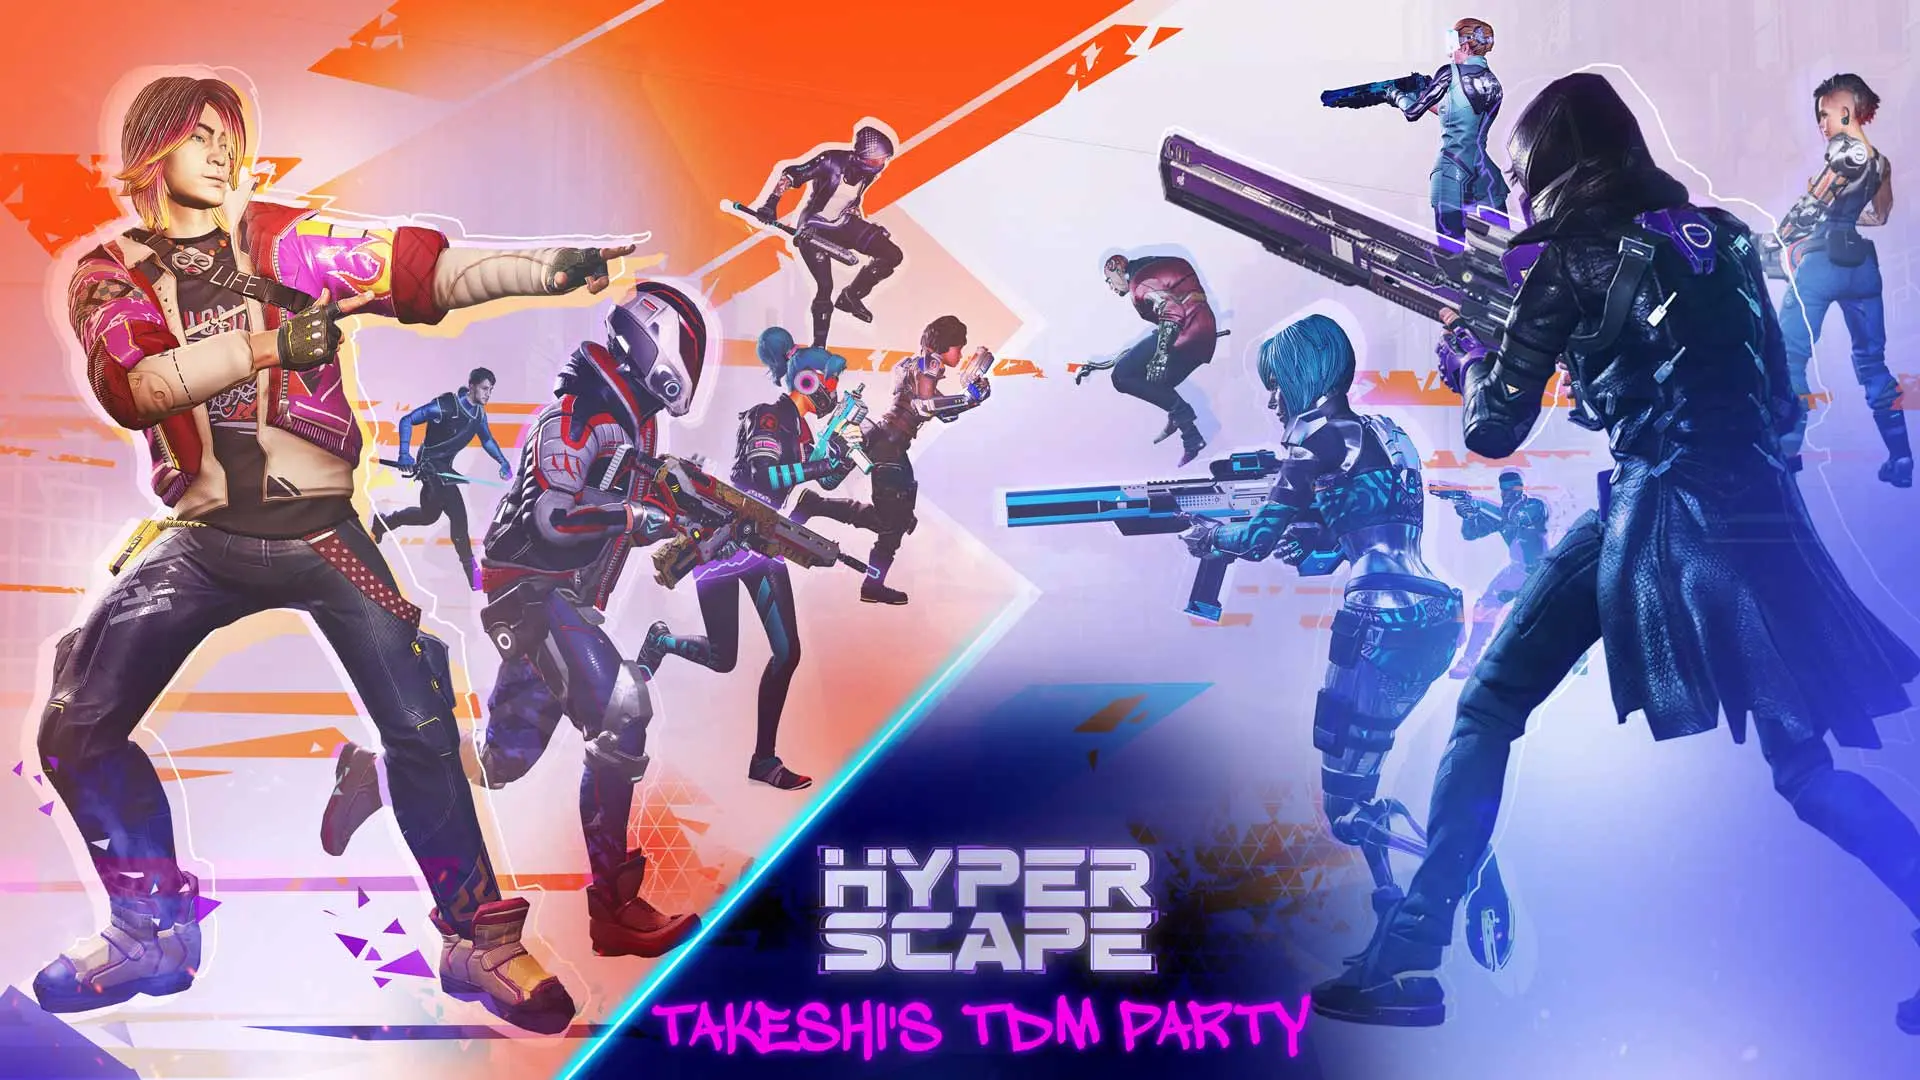 Hyper Scape Takeshi’s Team Deathmatch Party